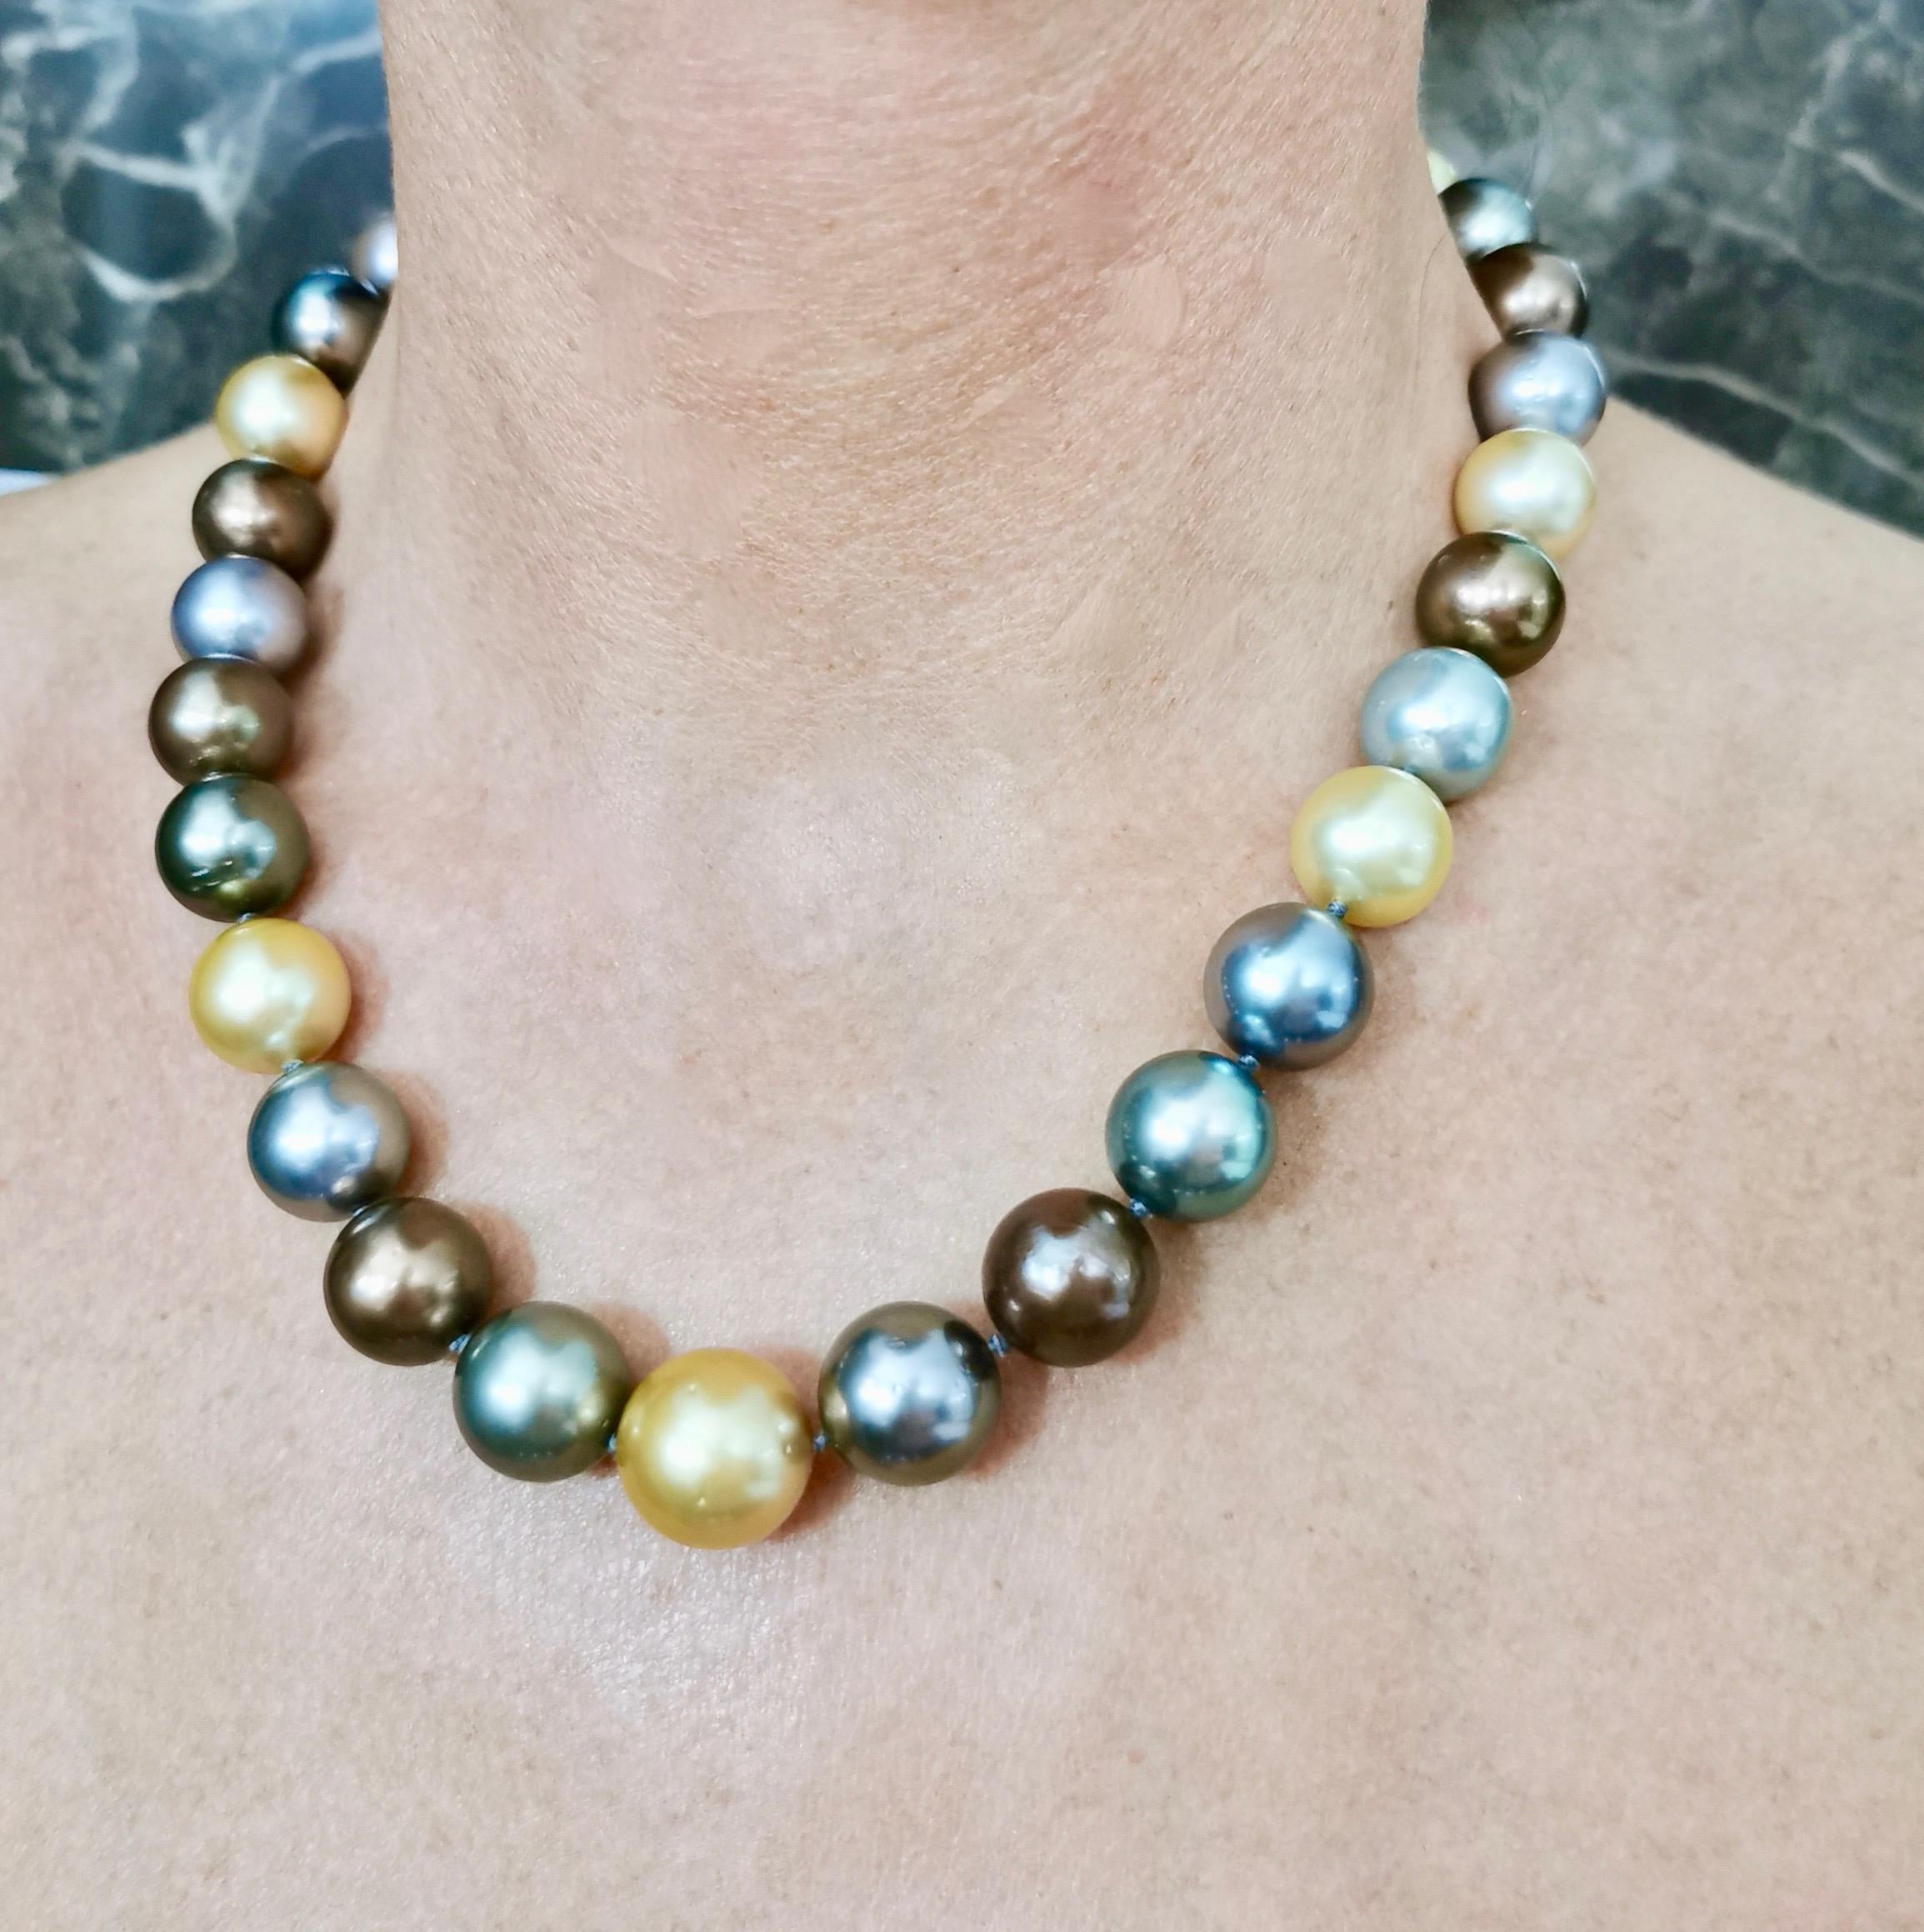 pearl white gold necklace